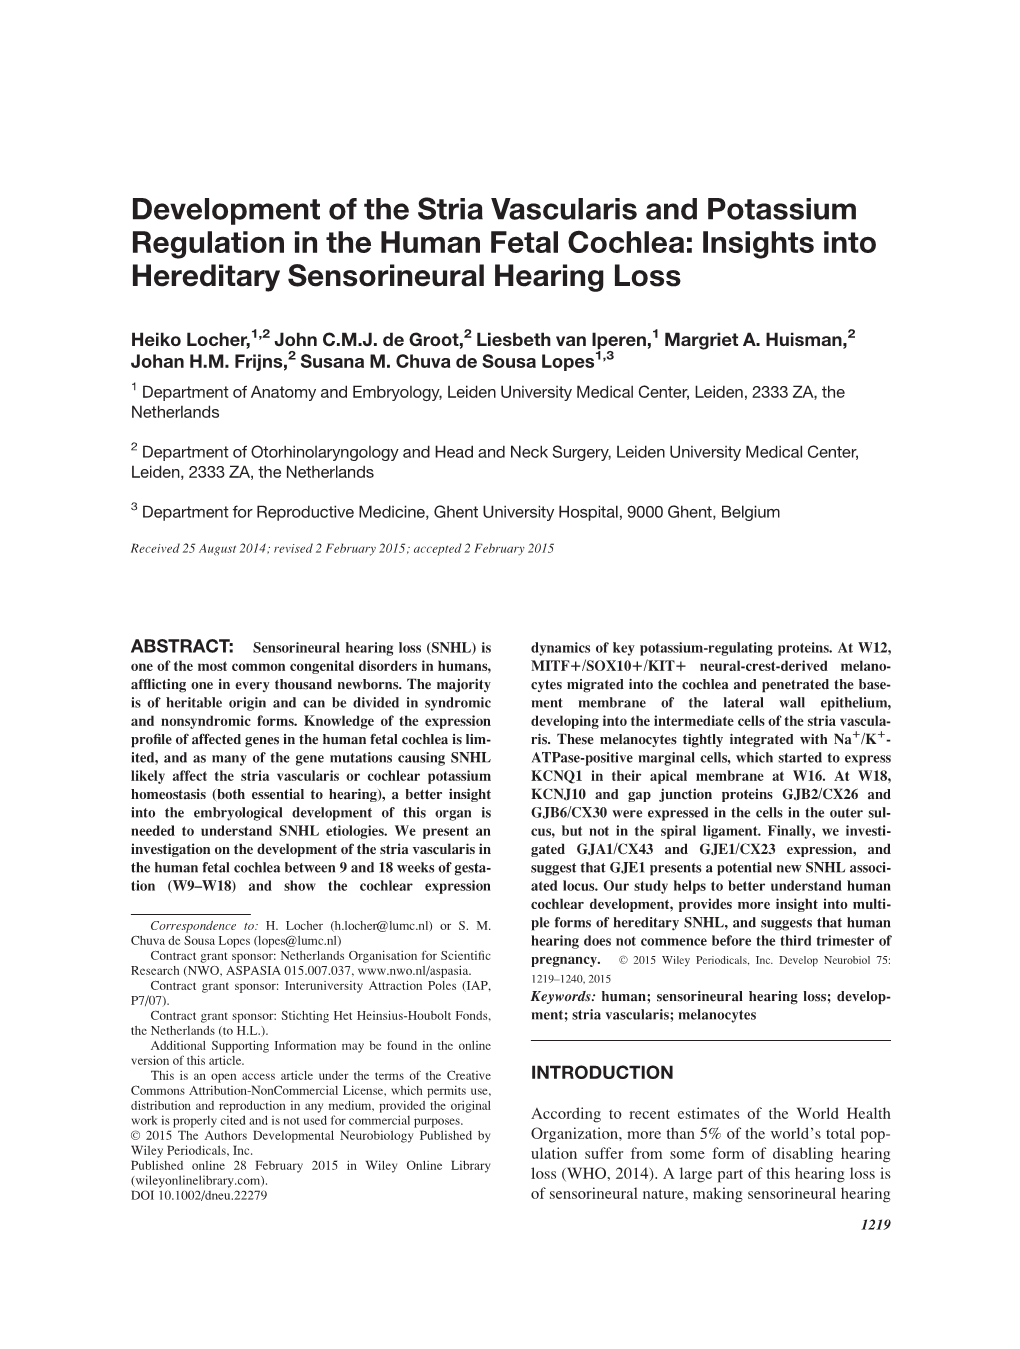 Development of the Stria Vascularis and Potassium Regulation in the Human Fetal Cochlea: Insights Into Hereditary Sensorineural Hearing Loss